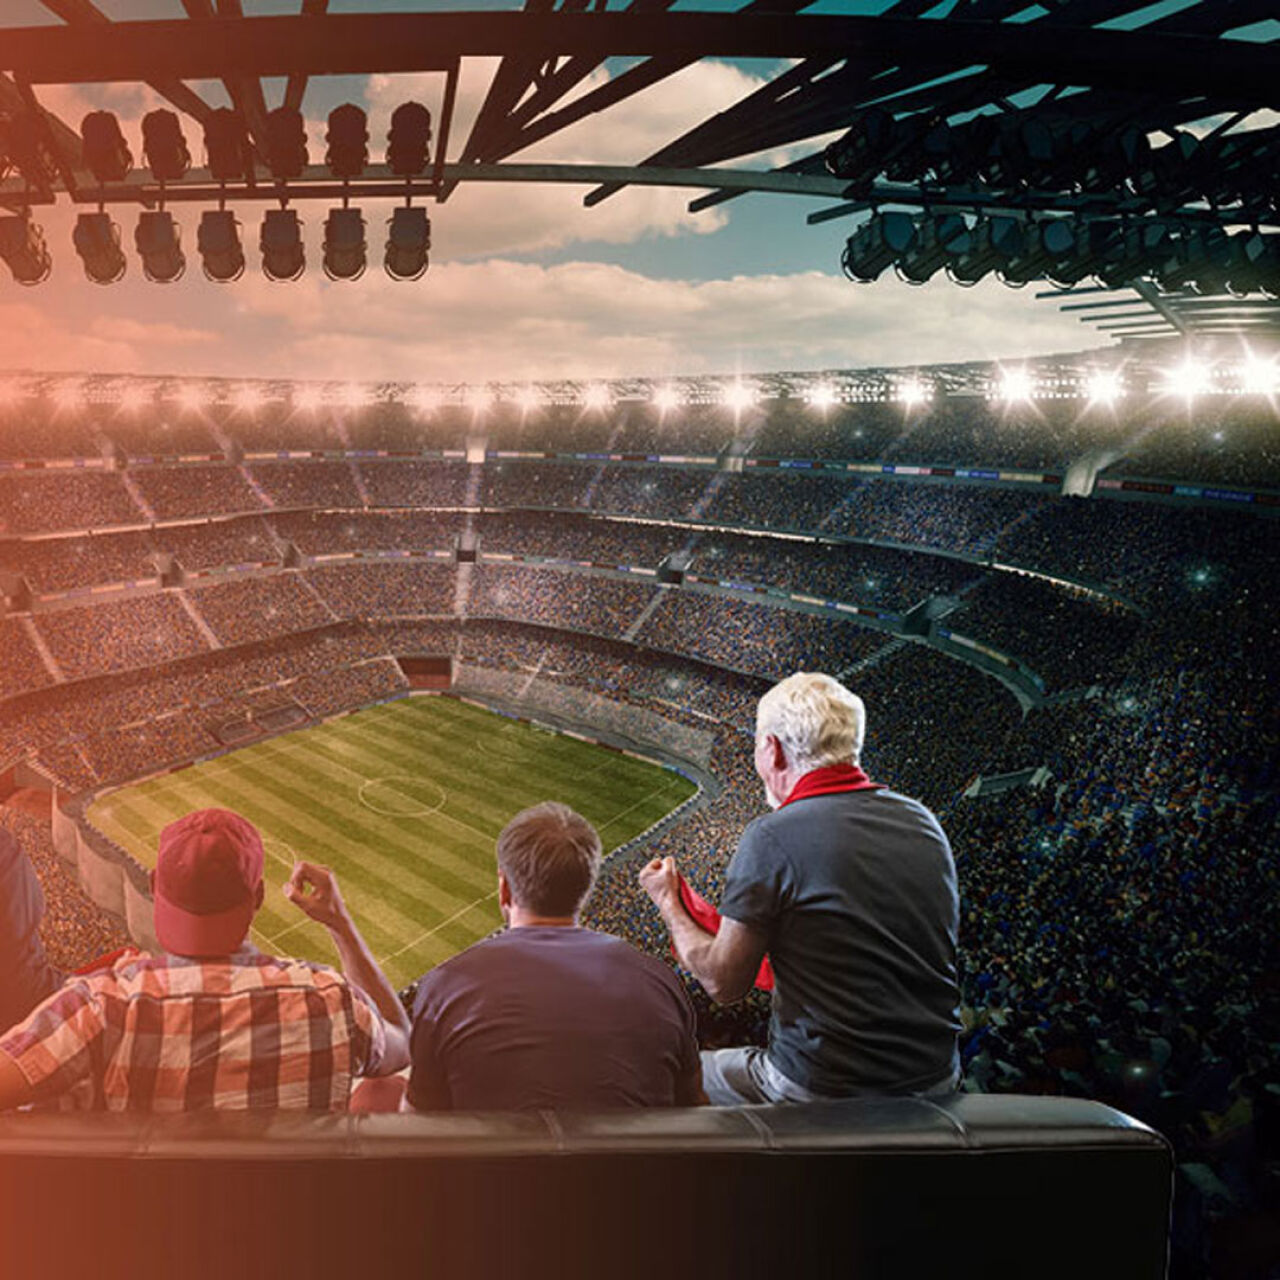 WIN a VIP Experience for 4 to watch your favourite sporting team in the luxury of a Corporate Box.